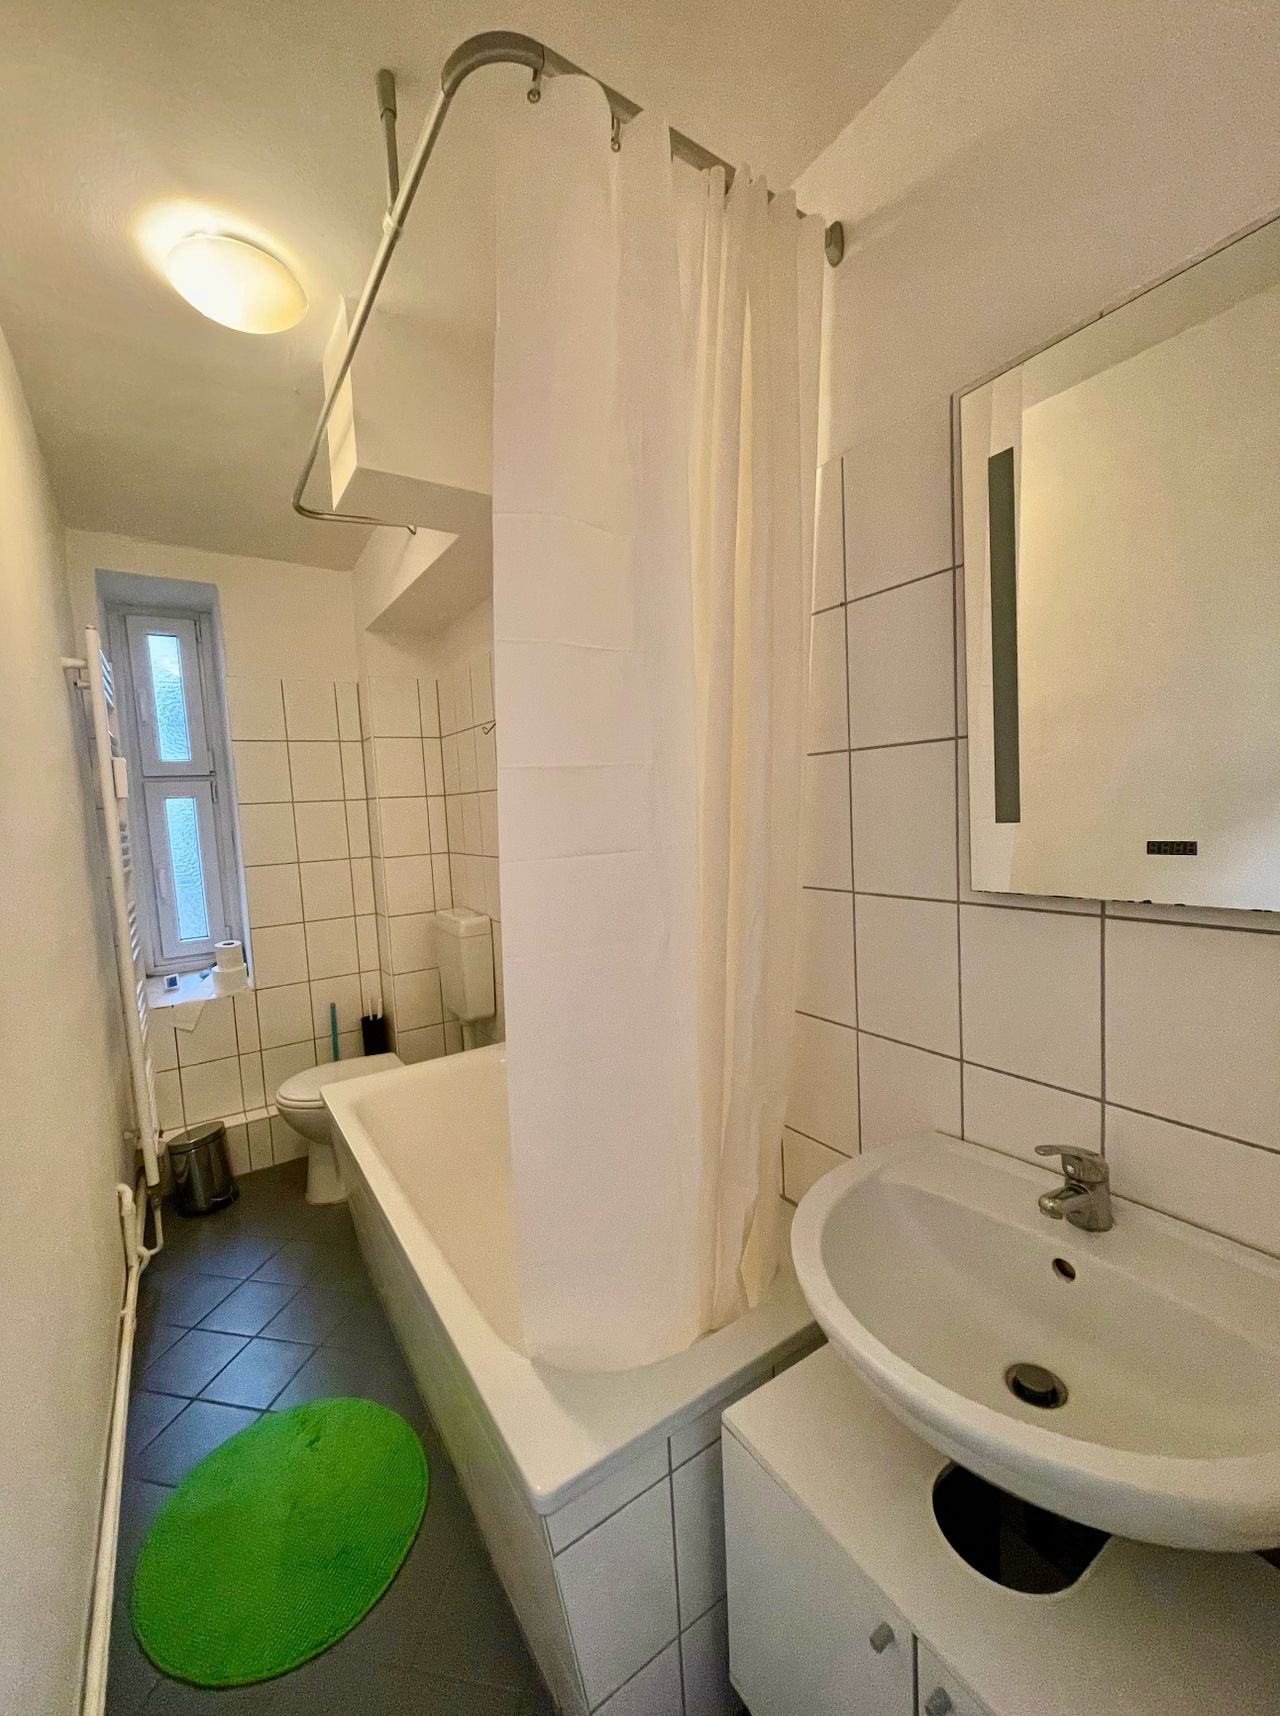 2.5 Rooms Accessible Apartment in Neukölln, near the water: Maybachufer/Landwehr Canal/Reuterkiez